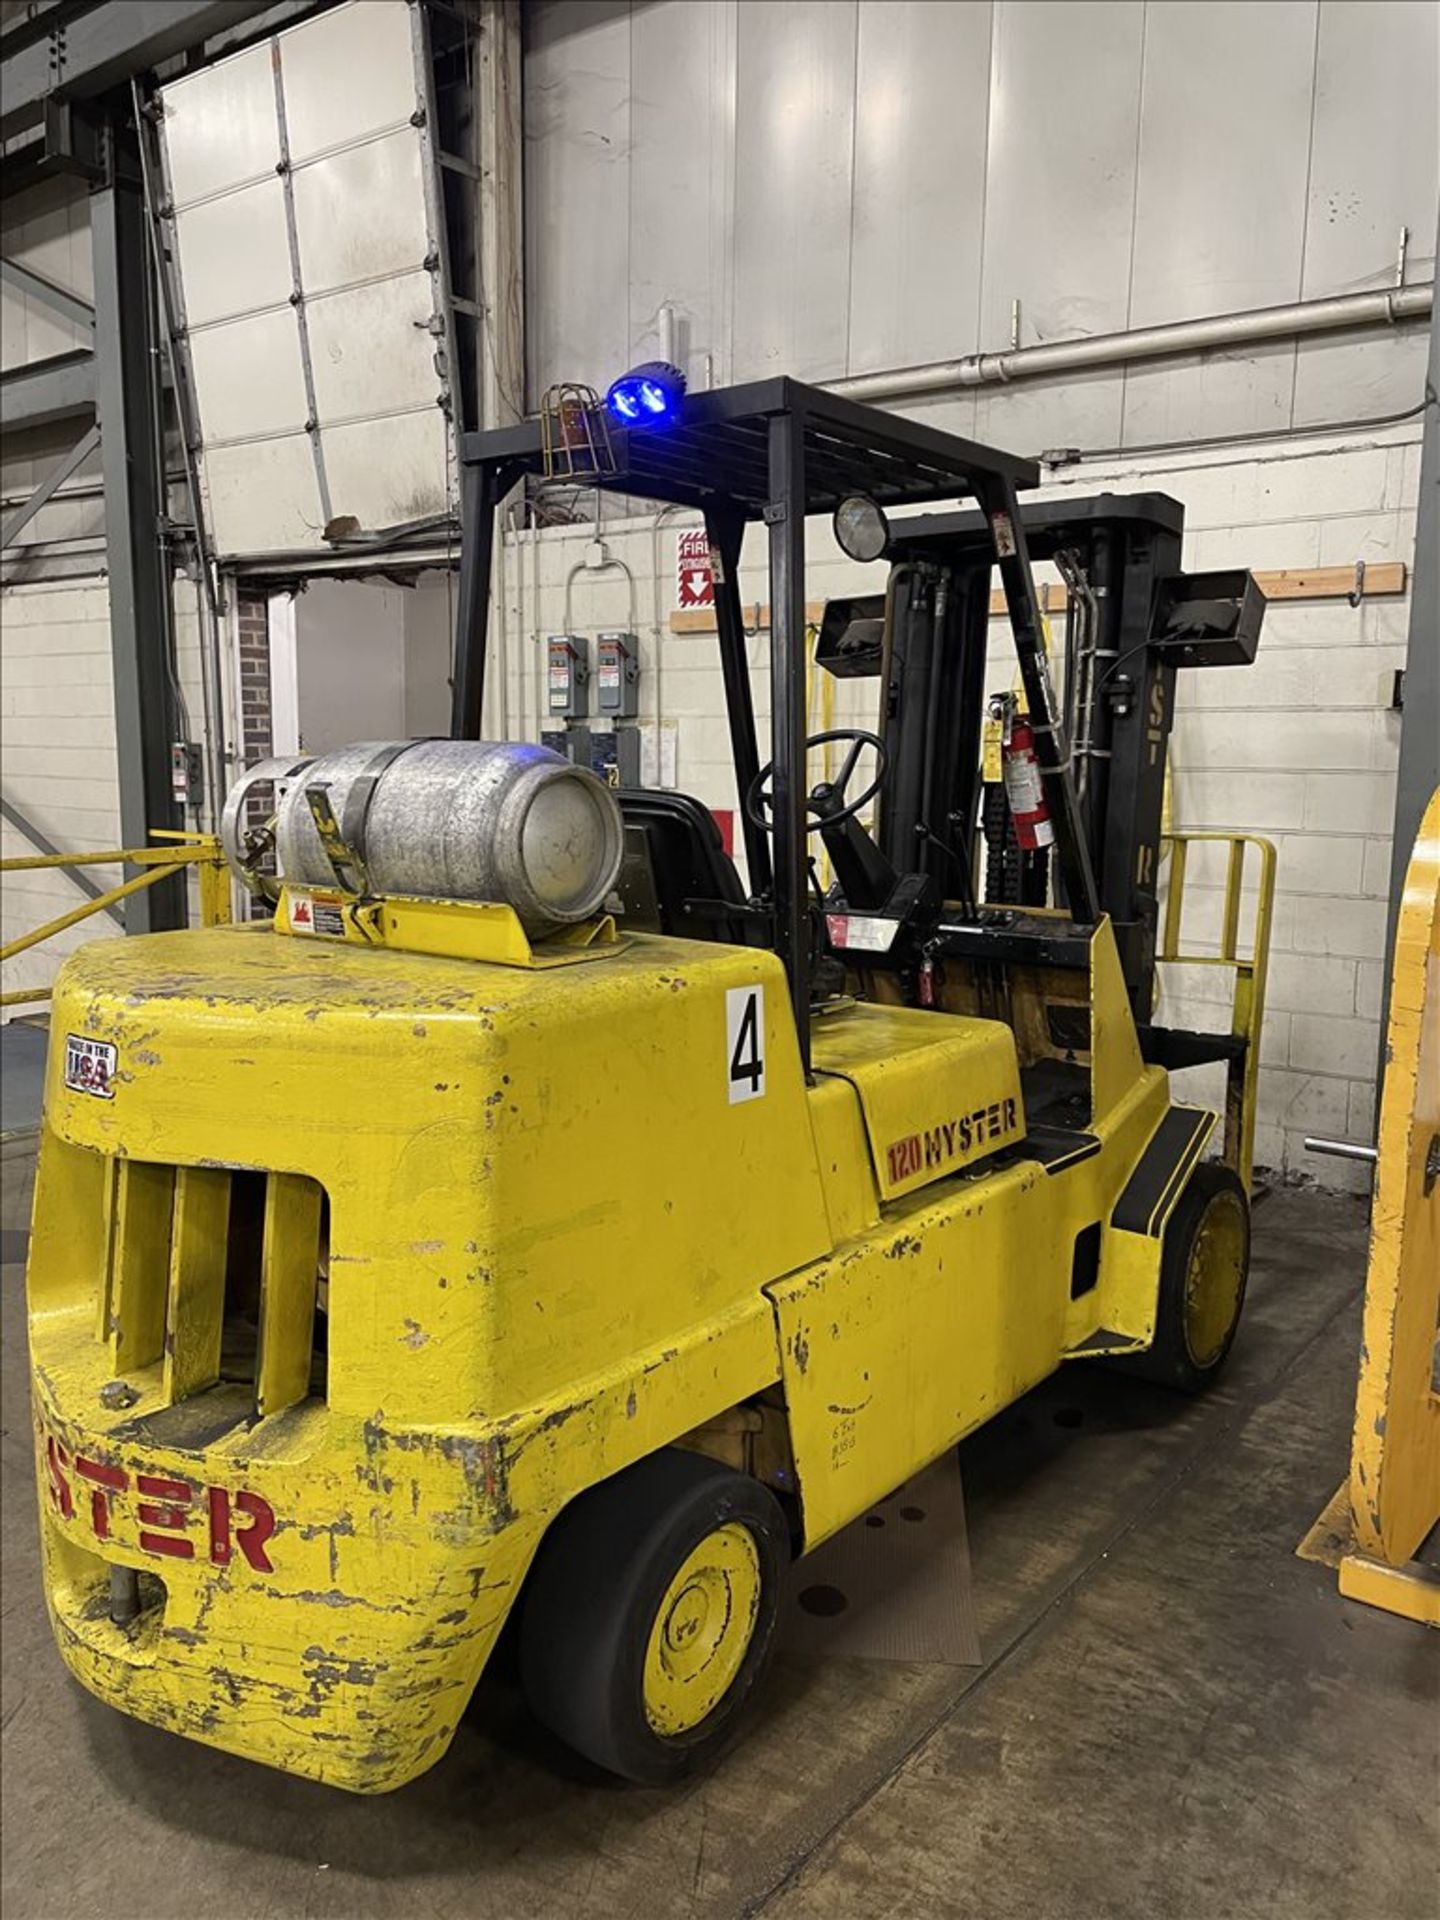 HYSTER S120XL 12,000 lb LP Forklift, s/n D004V03680L, 168" Load Height (Located in Wood Dale, IL) - Image 2 of 8